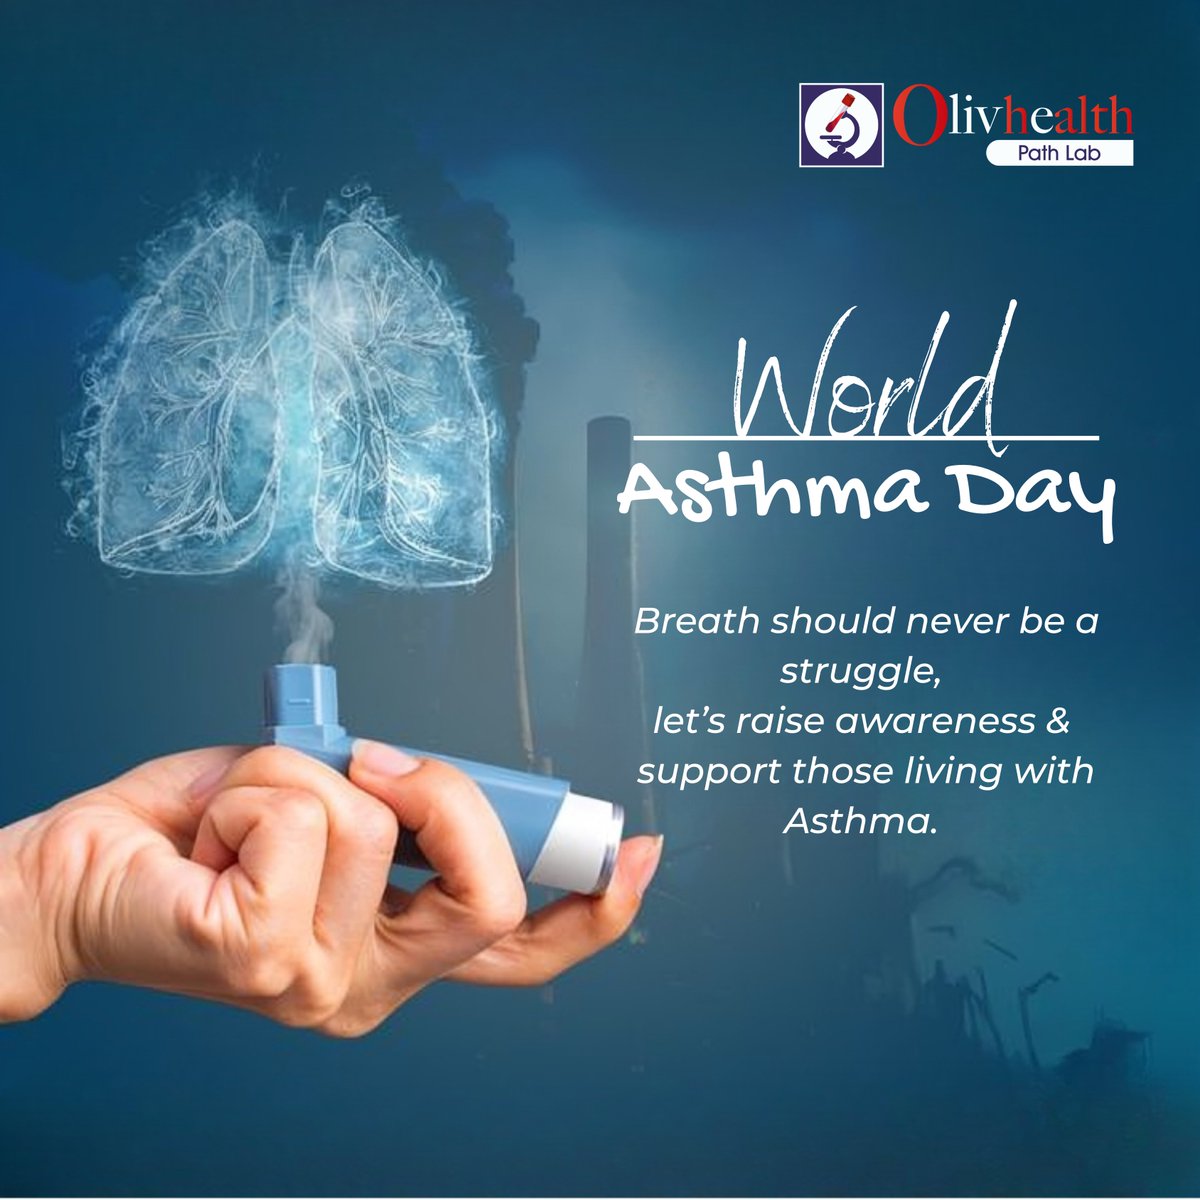 When you can't breathe, nothing else in your life matters. On this World Asthma Day, let's help to create awareness about asthma so people can breathe more easily.

#WorldAsthmaDay #asthma #asthmaawareness #AsthmaDay #NurturingLittleMinds #olivhealthpathlab #pathology